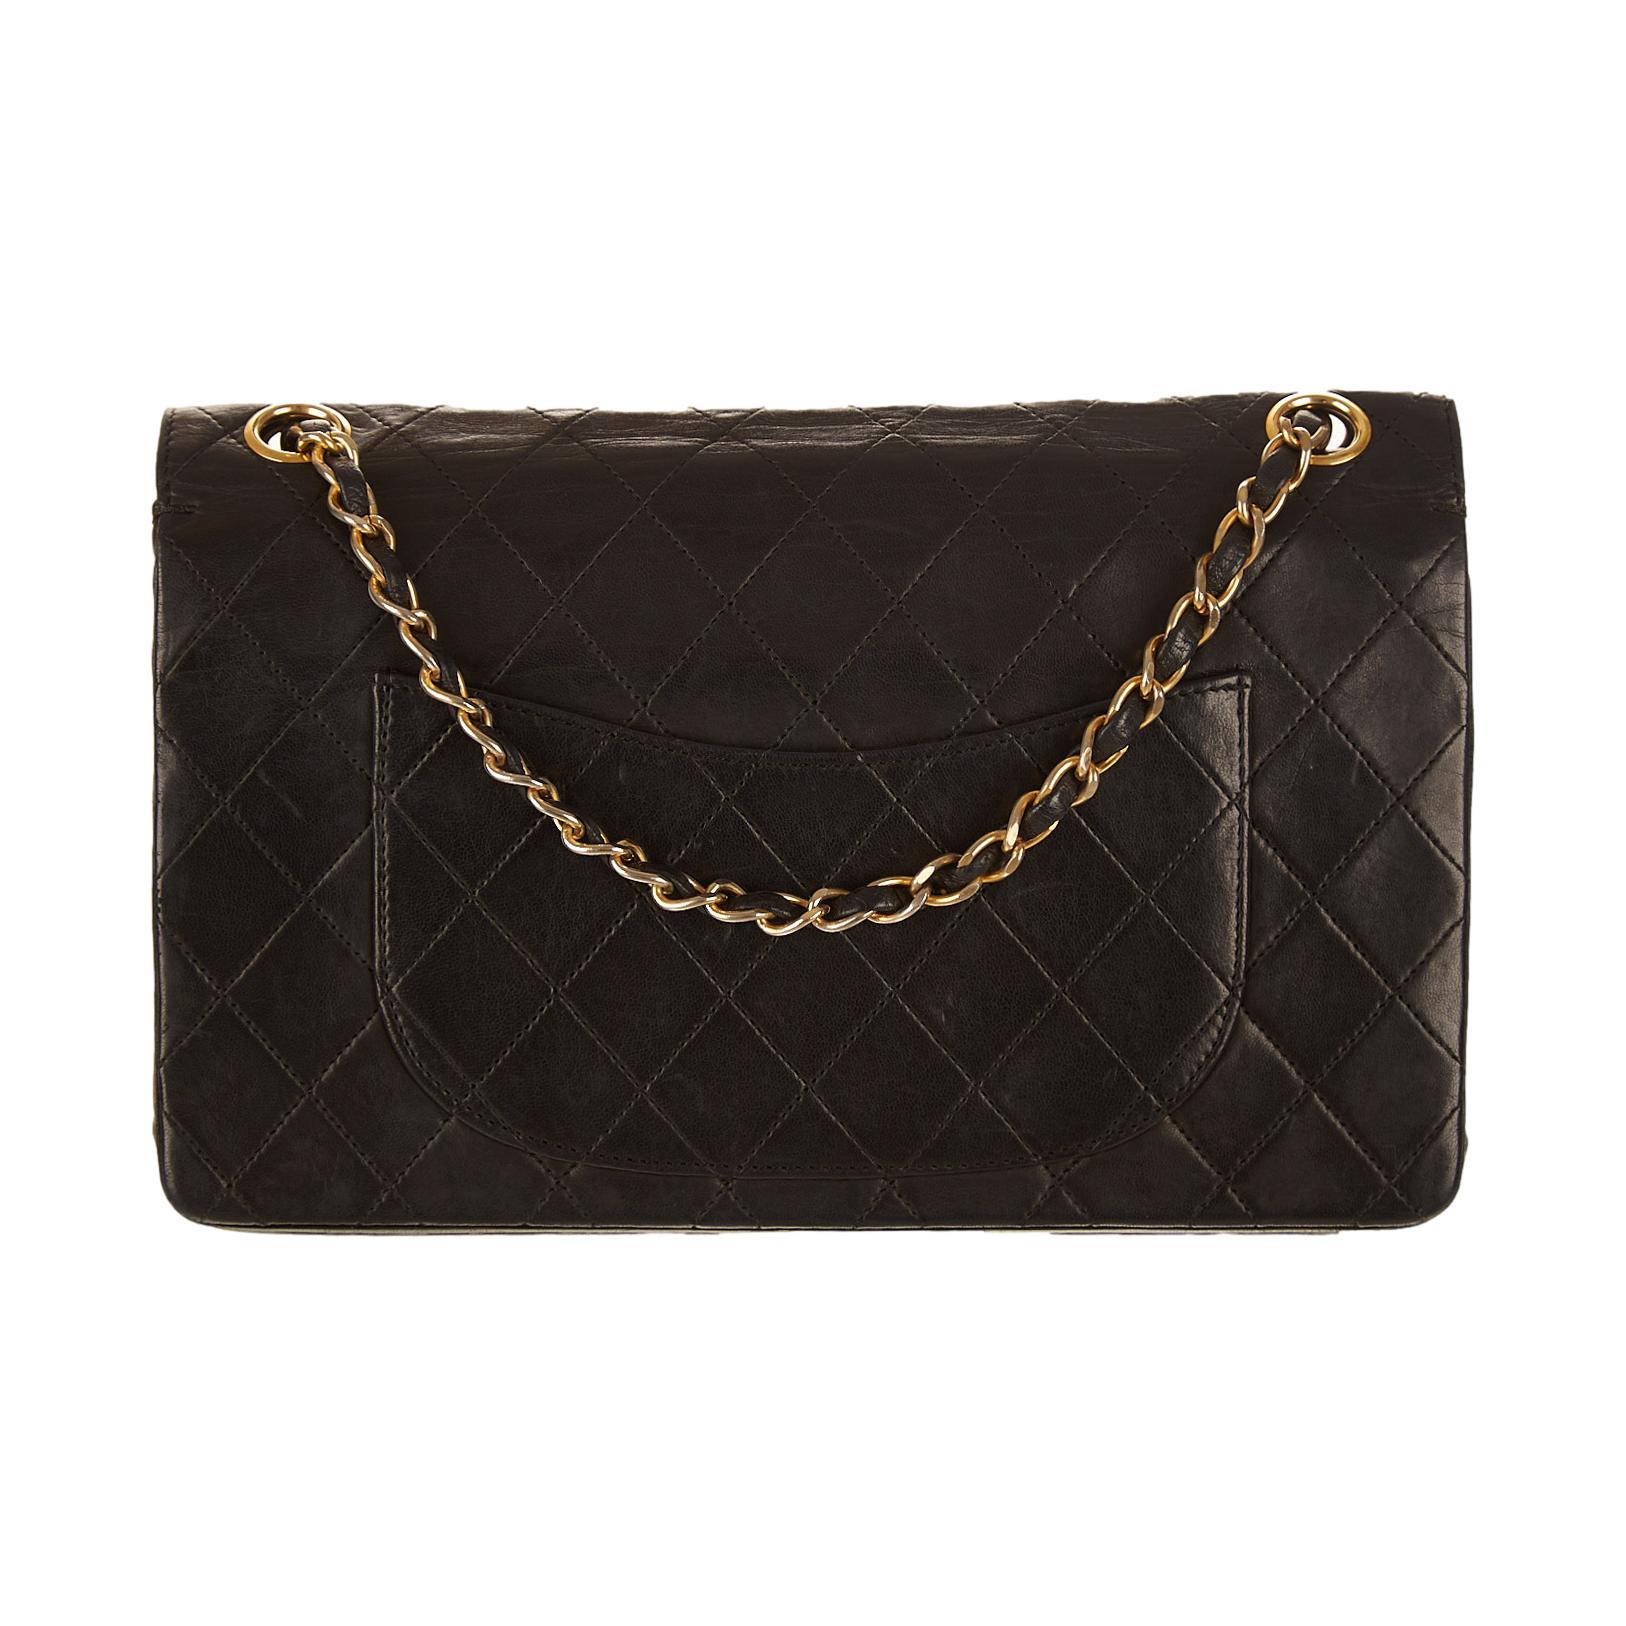 Chanel Black Quilted Double Flap Bag